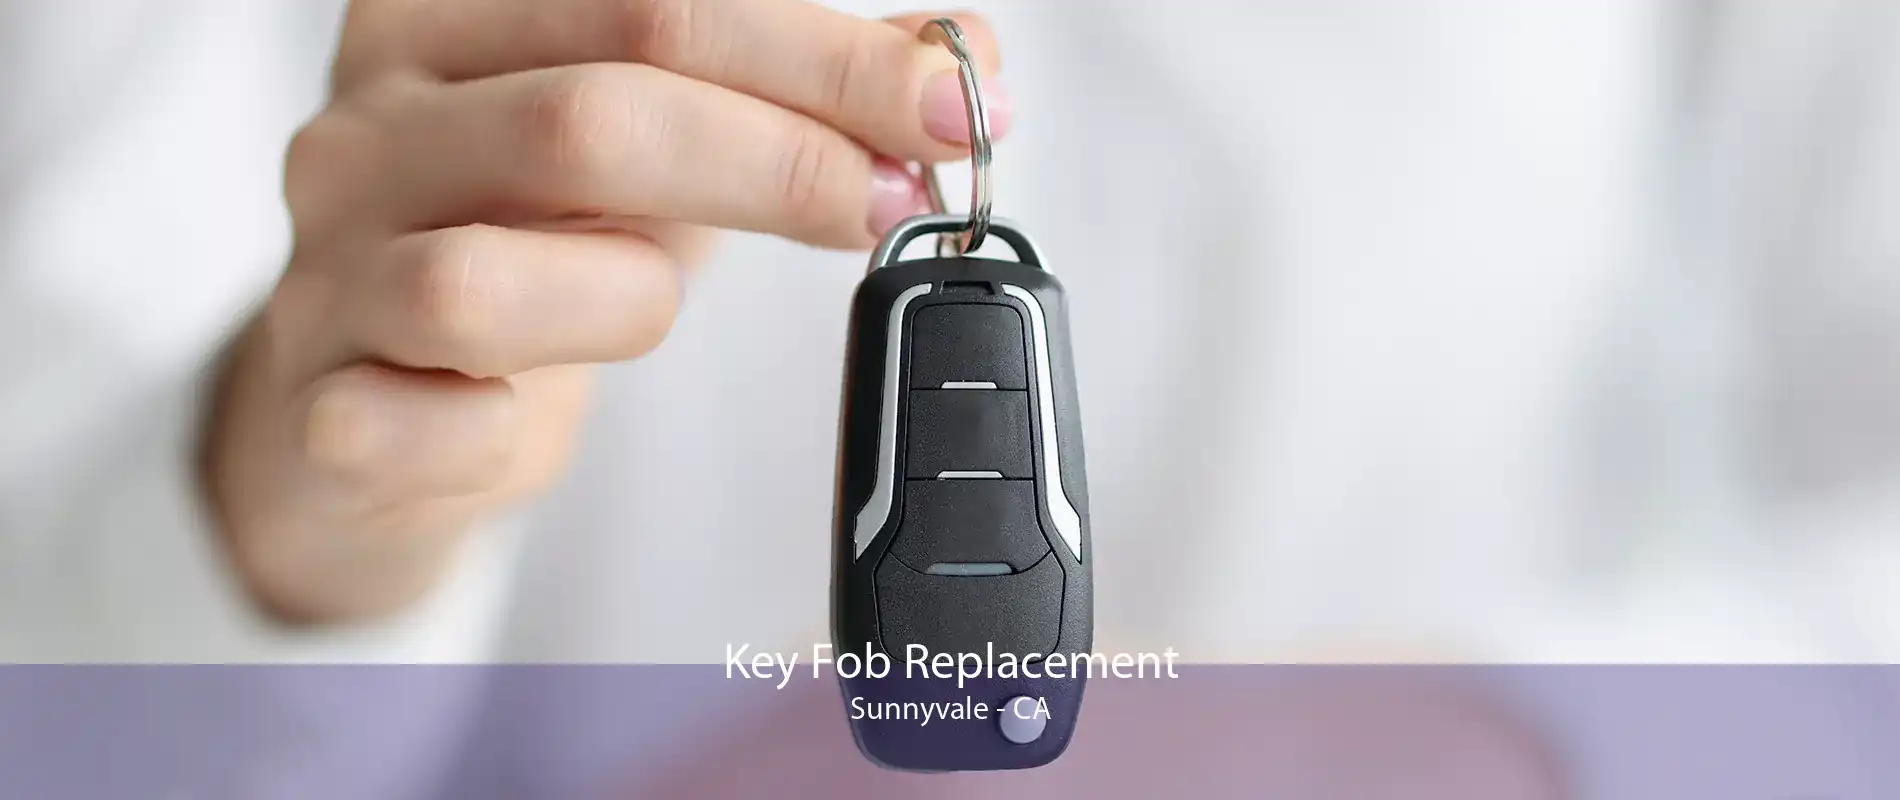 Key Fob Replacement Sunnyvale - CA